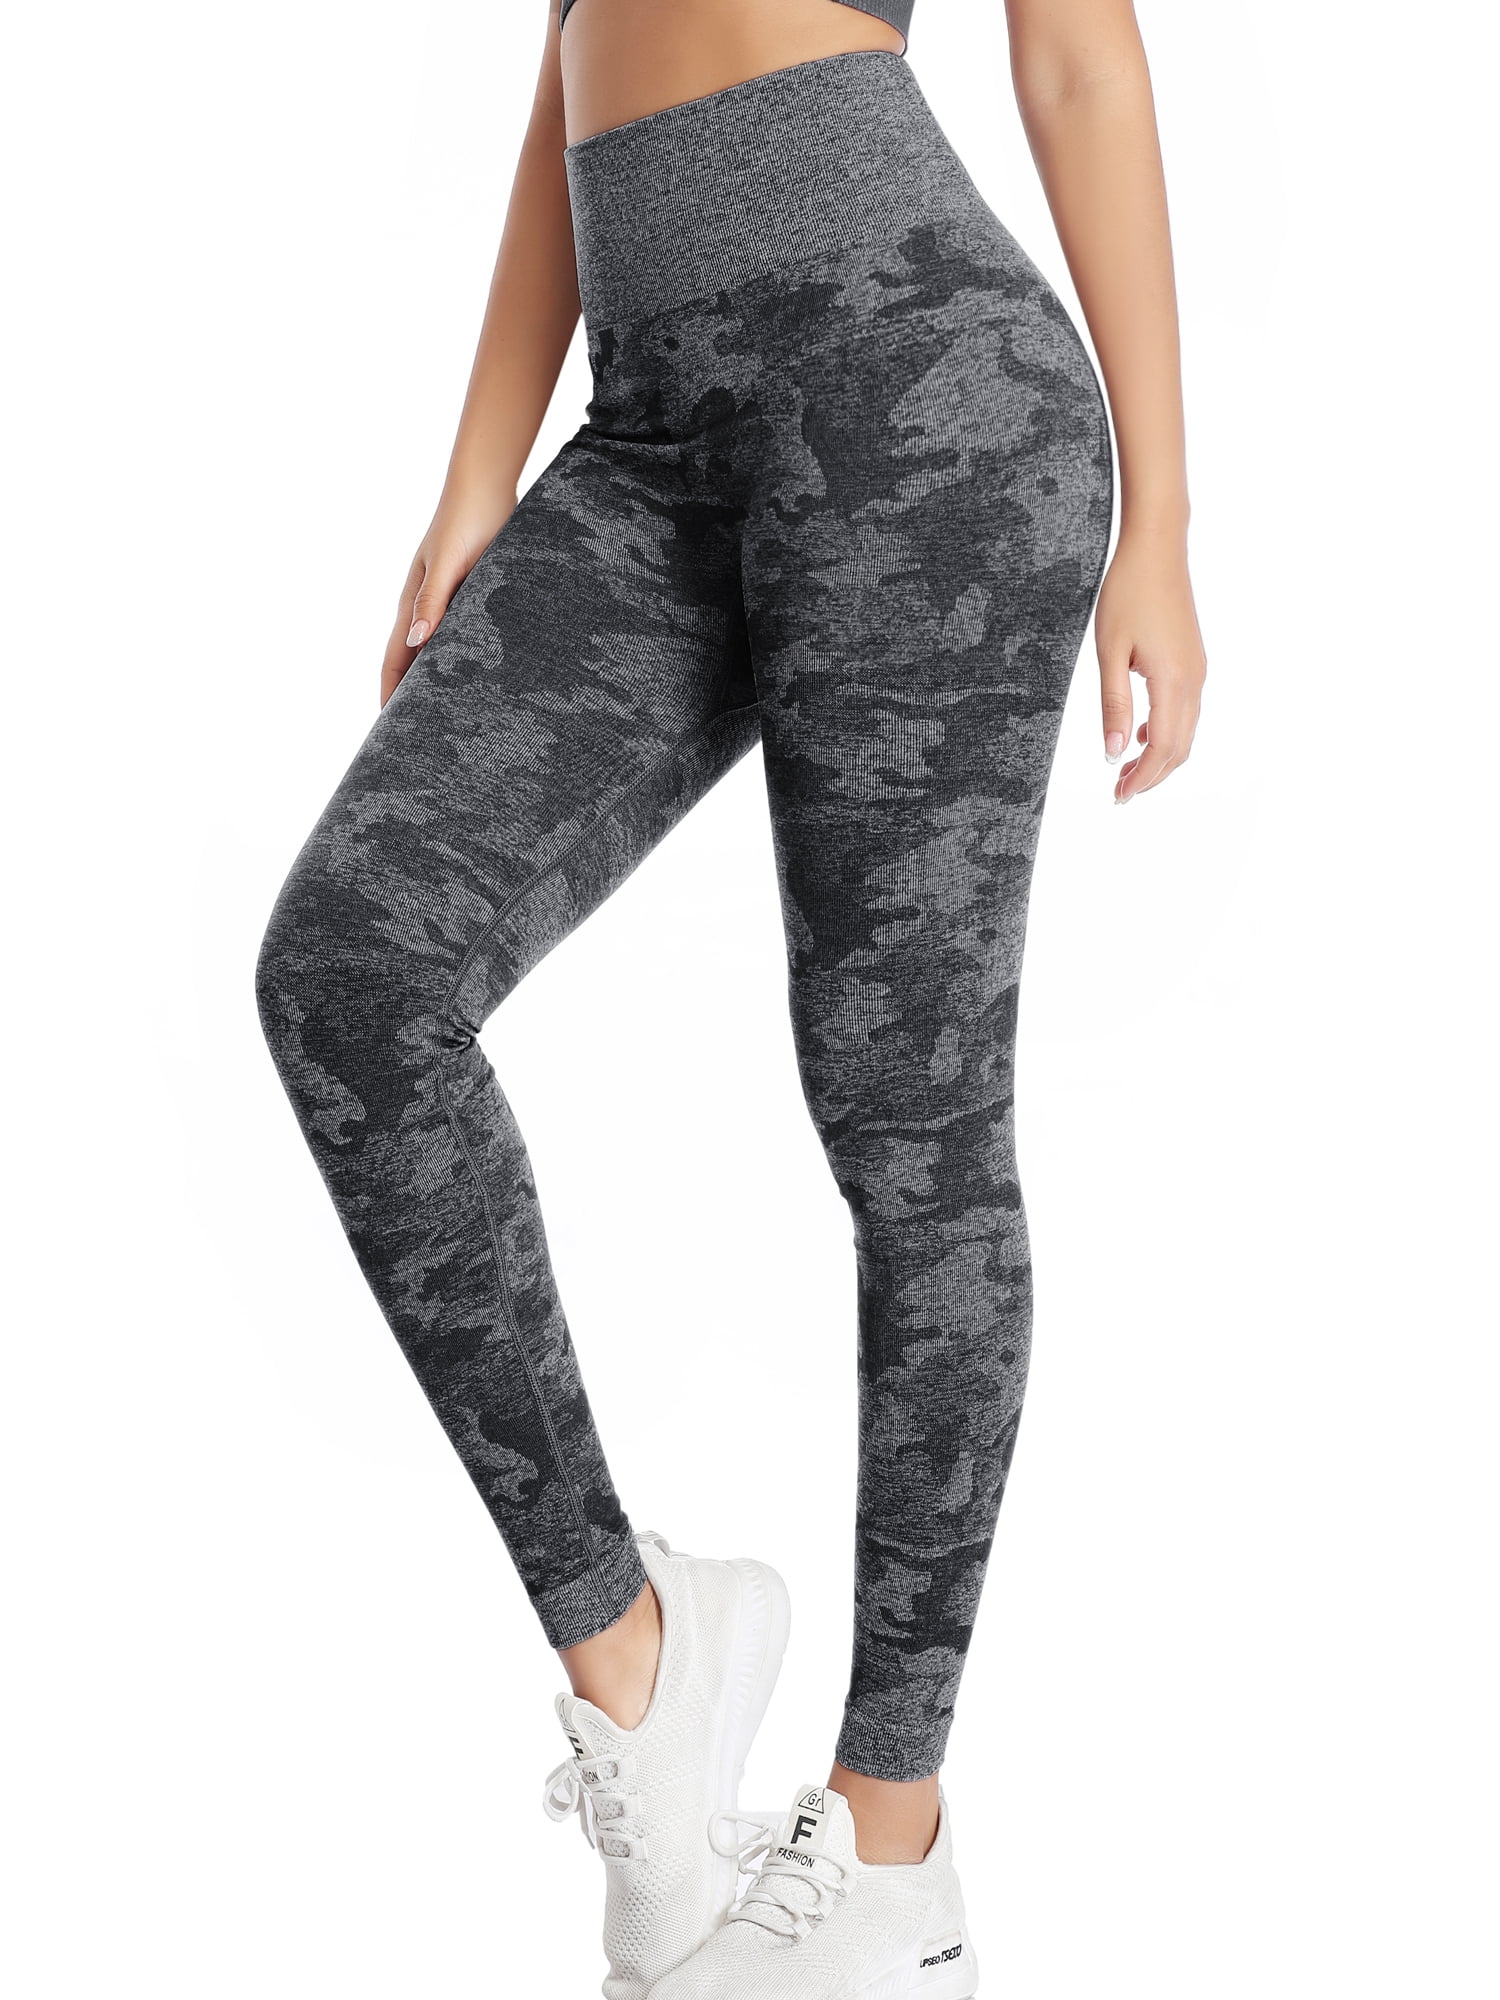 5 Day Tummy Slimming Workout Pants with Comfort Workout Clothes